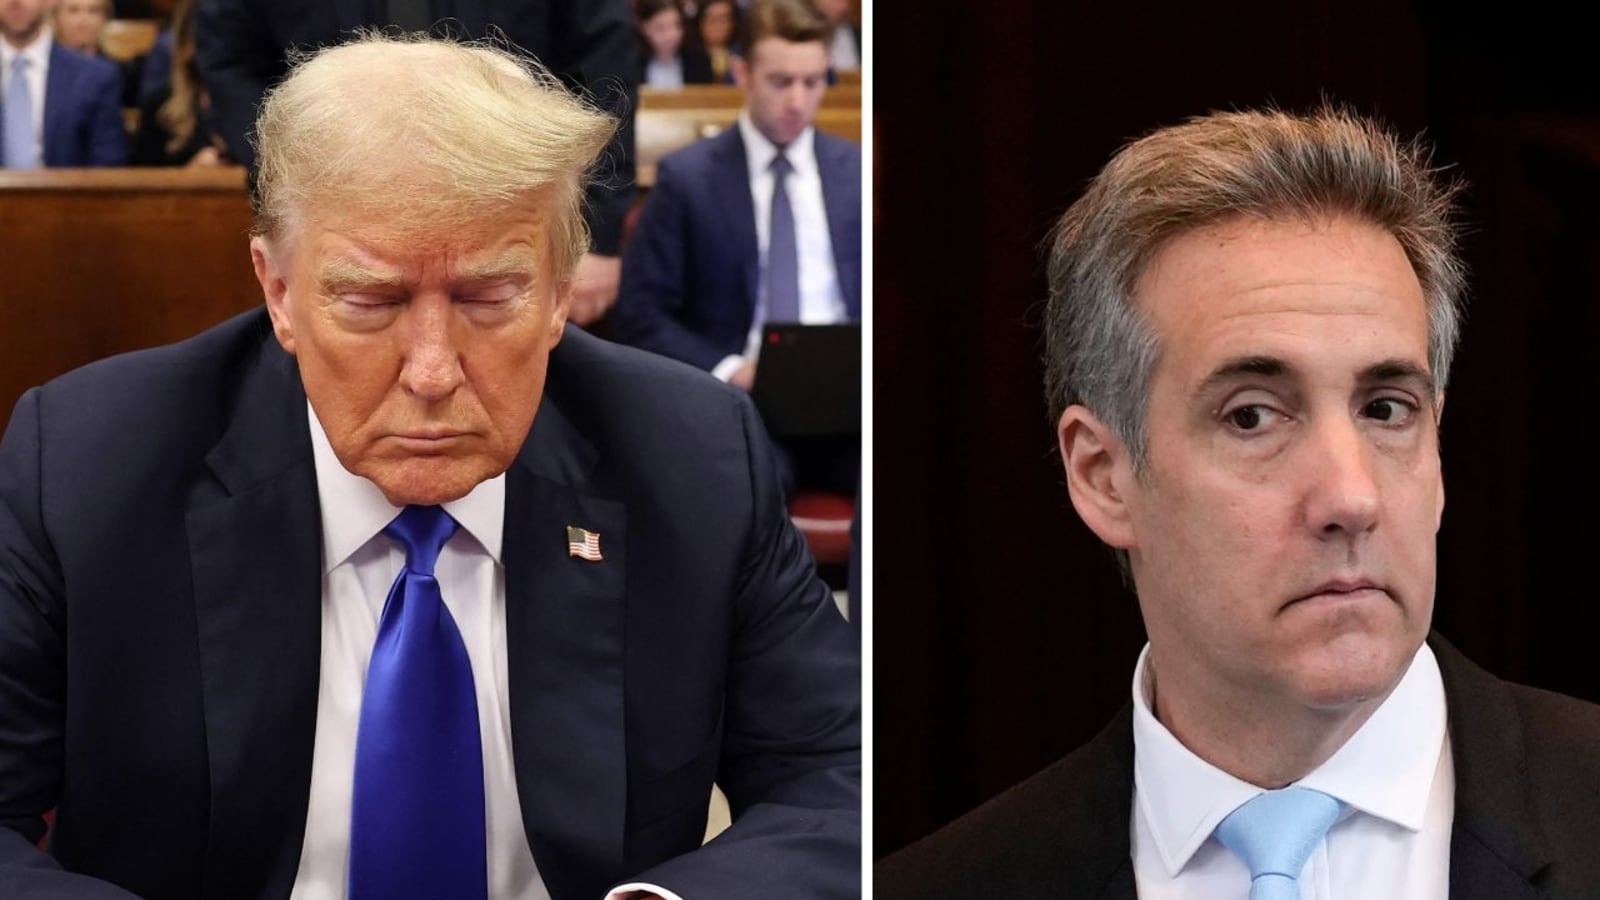 Michael Cohen says people will ‘end up in gulags’ and be thrown out of windows if Donald Trump is elected president